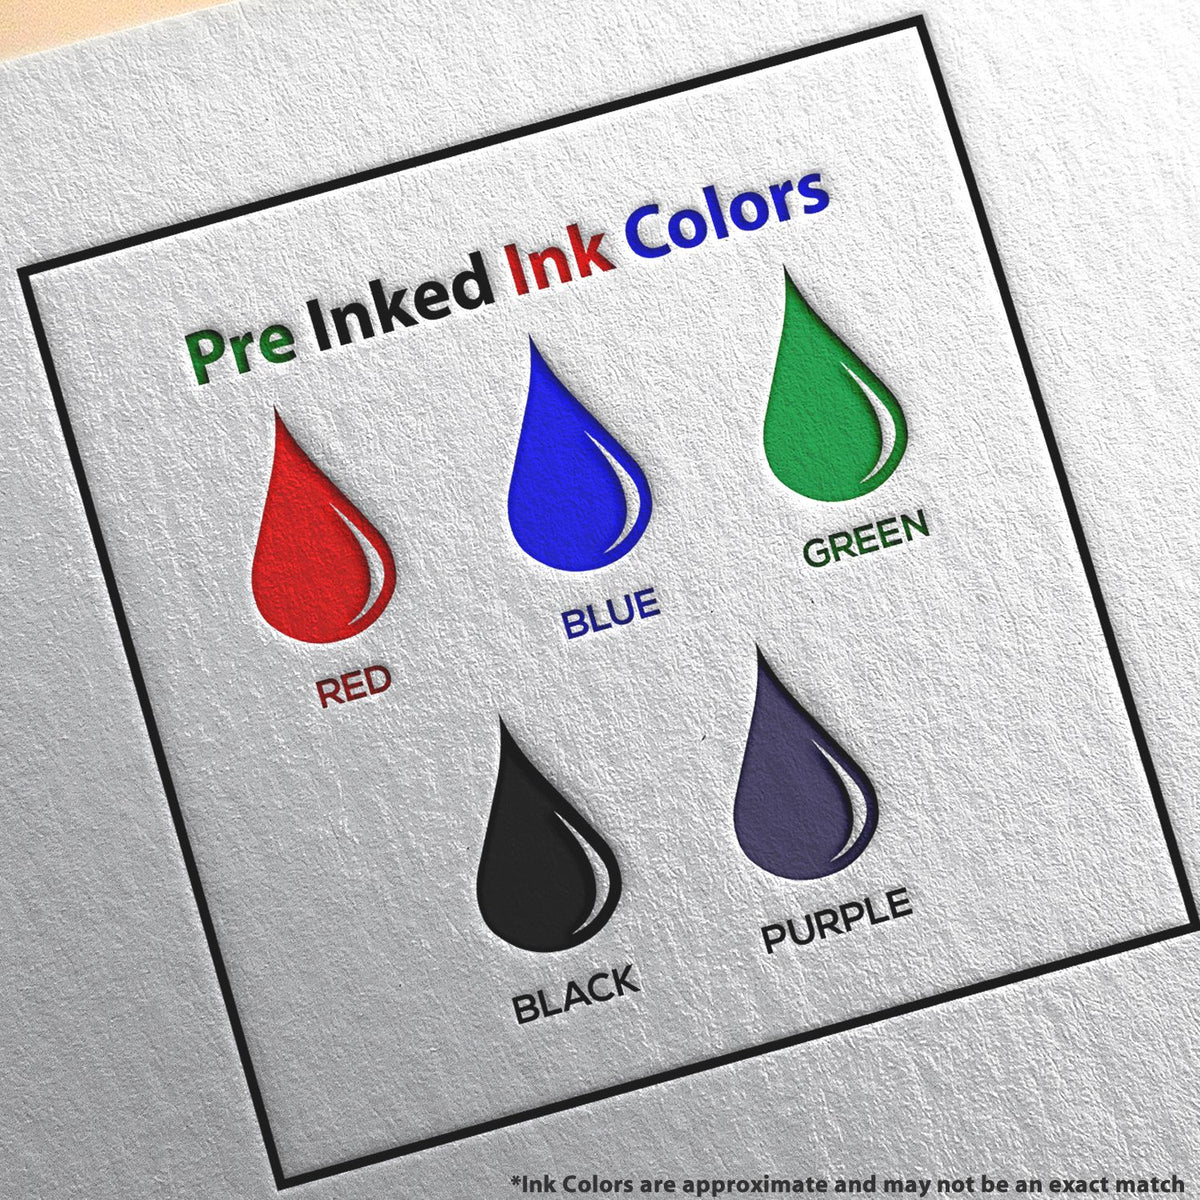 A picture showing the different ink colors or hues available for the Premium MaxLight Pre-Inked Vermont Engineering Stamp product.